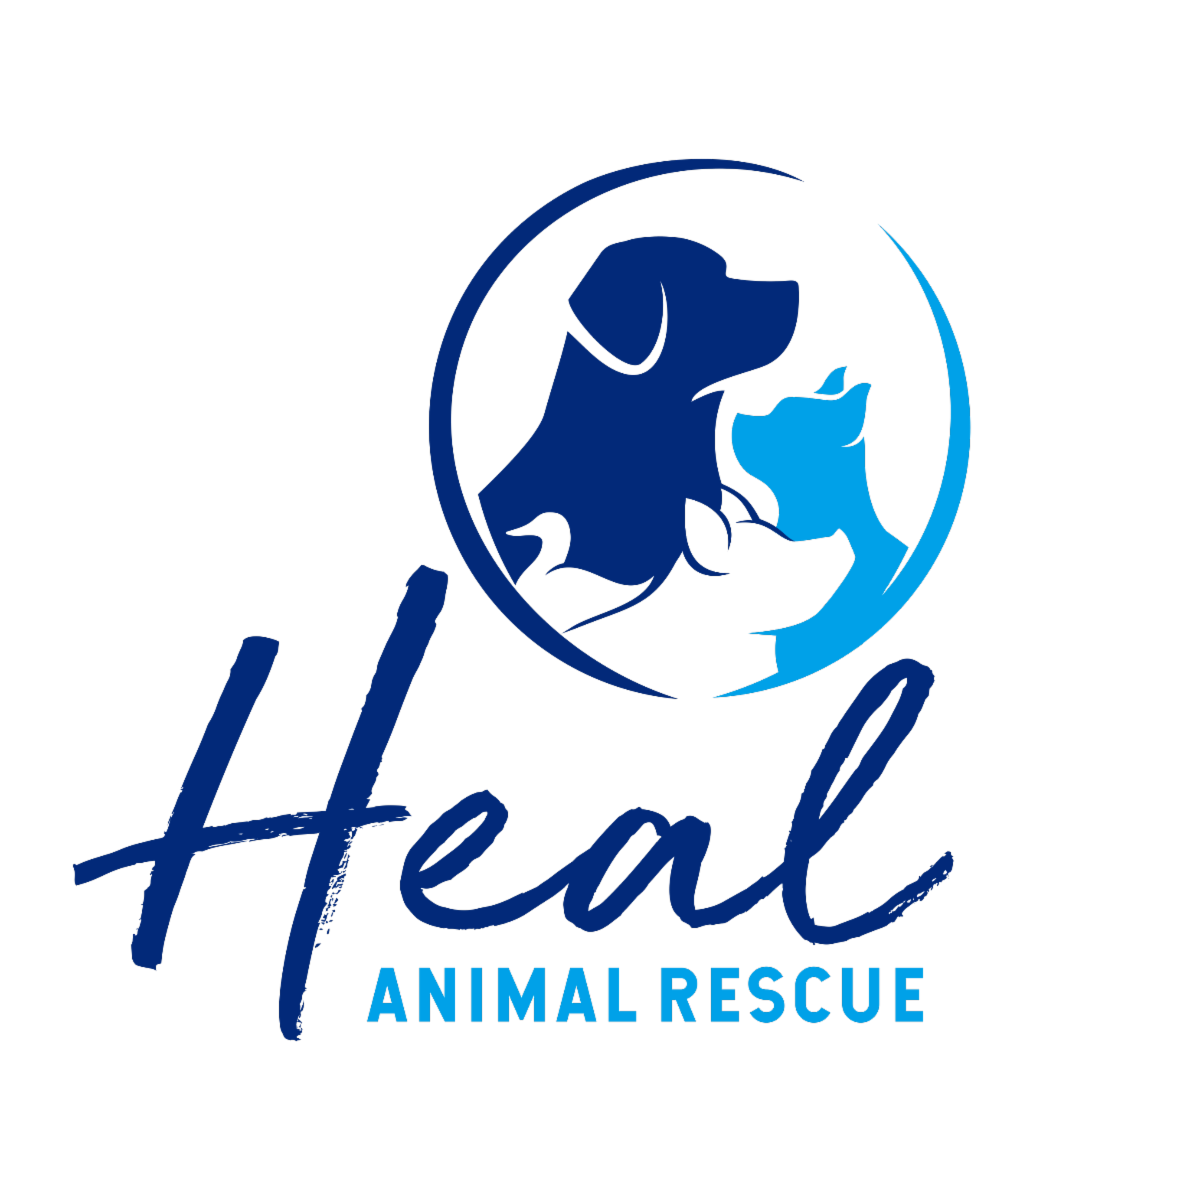 Heal Animal Rescue